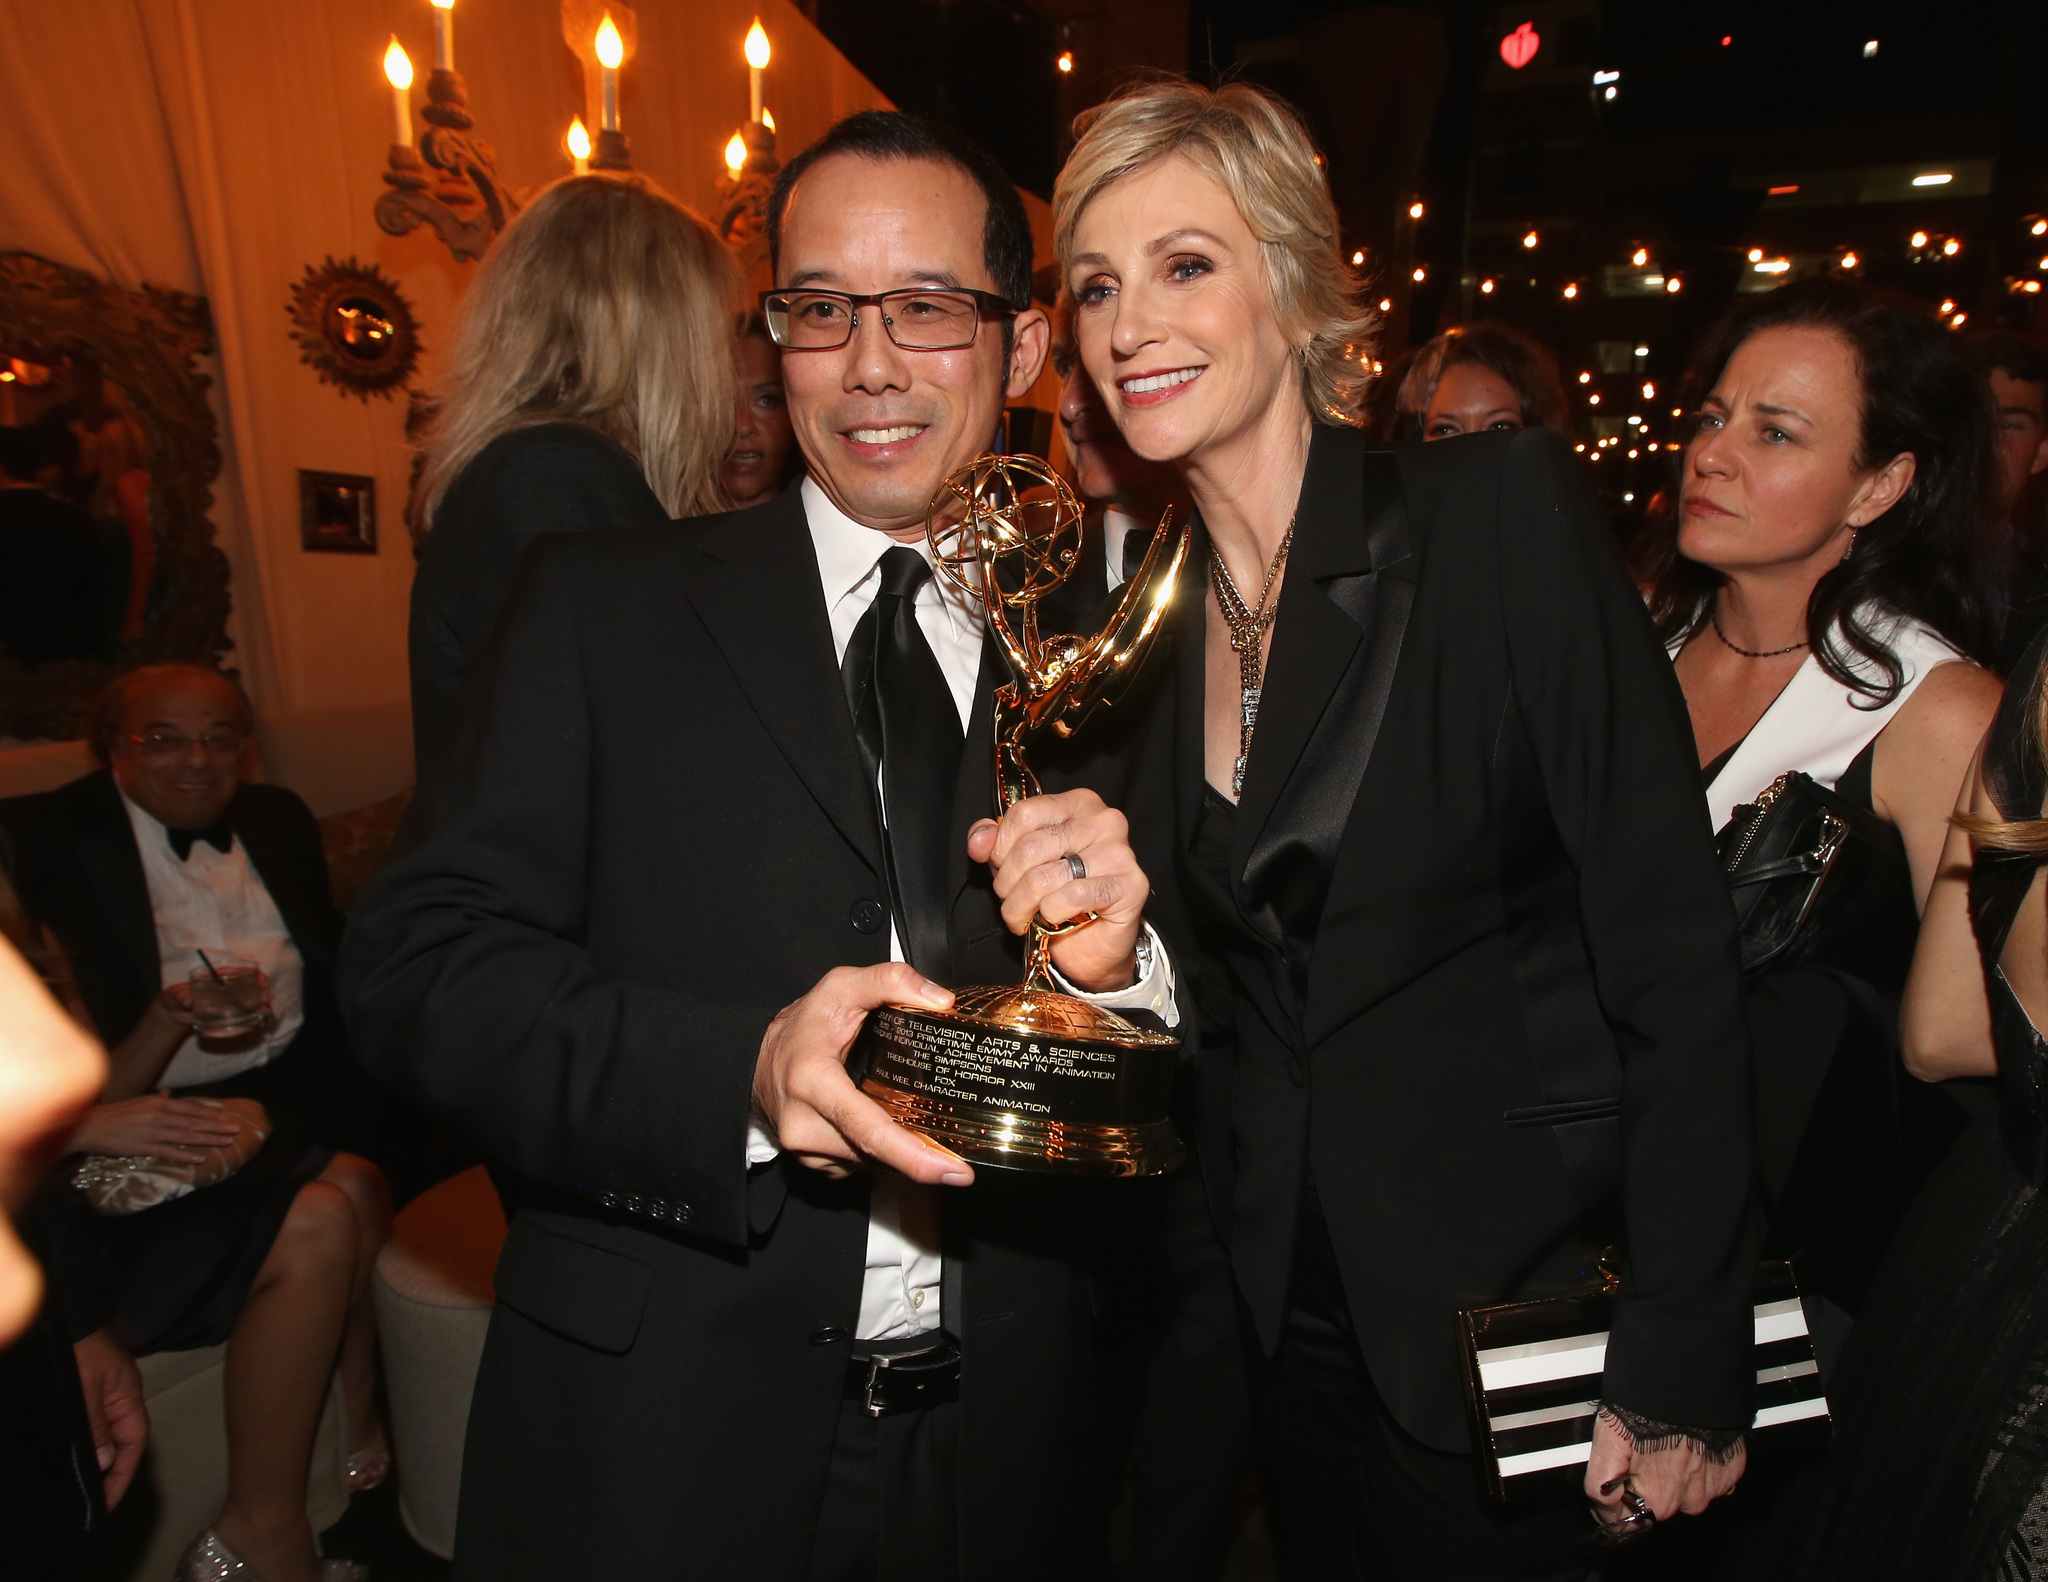 Jane Lynch and Paul Wee